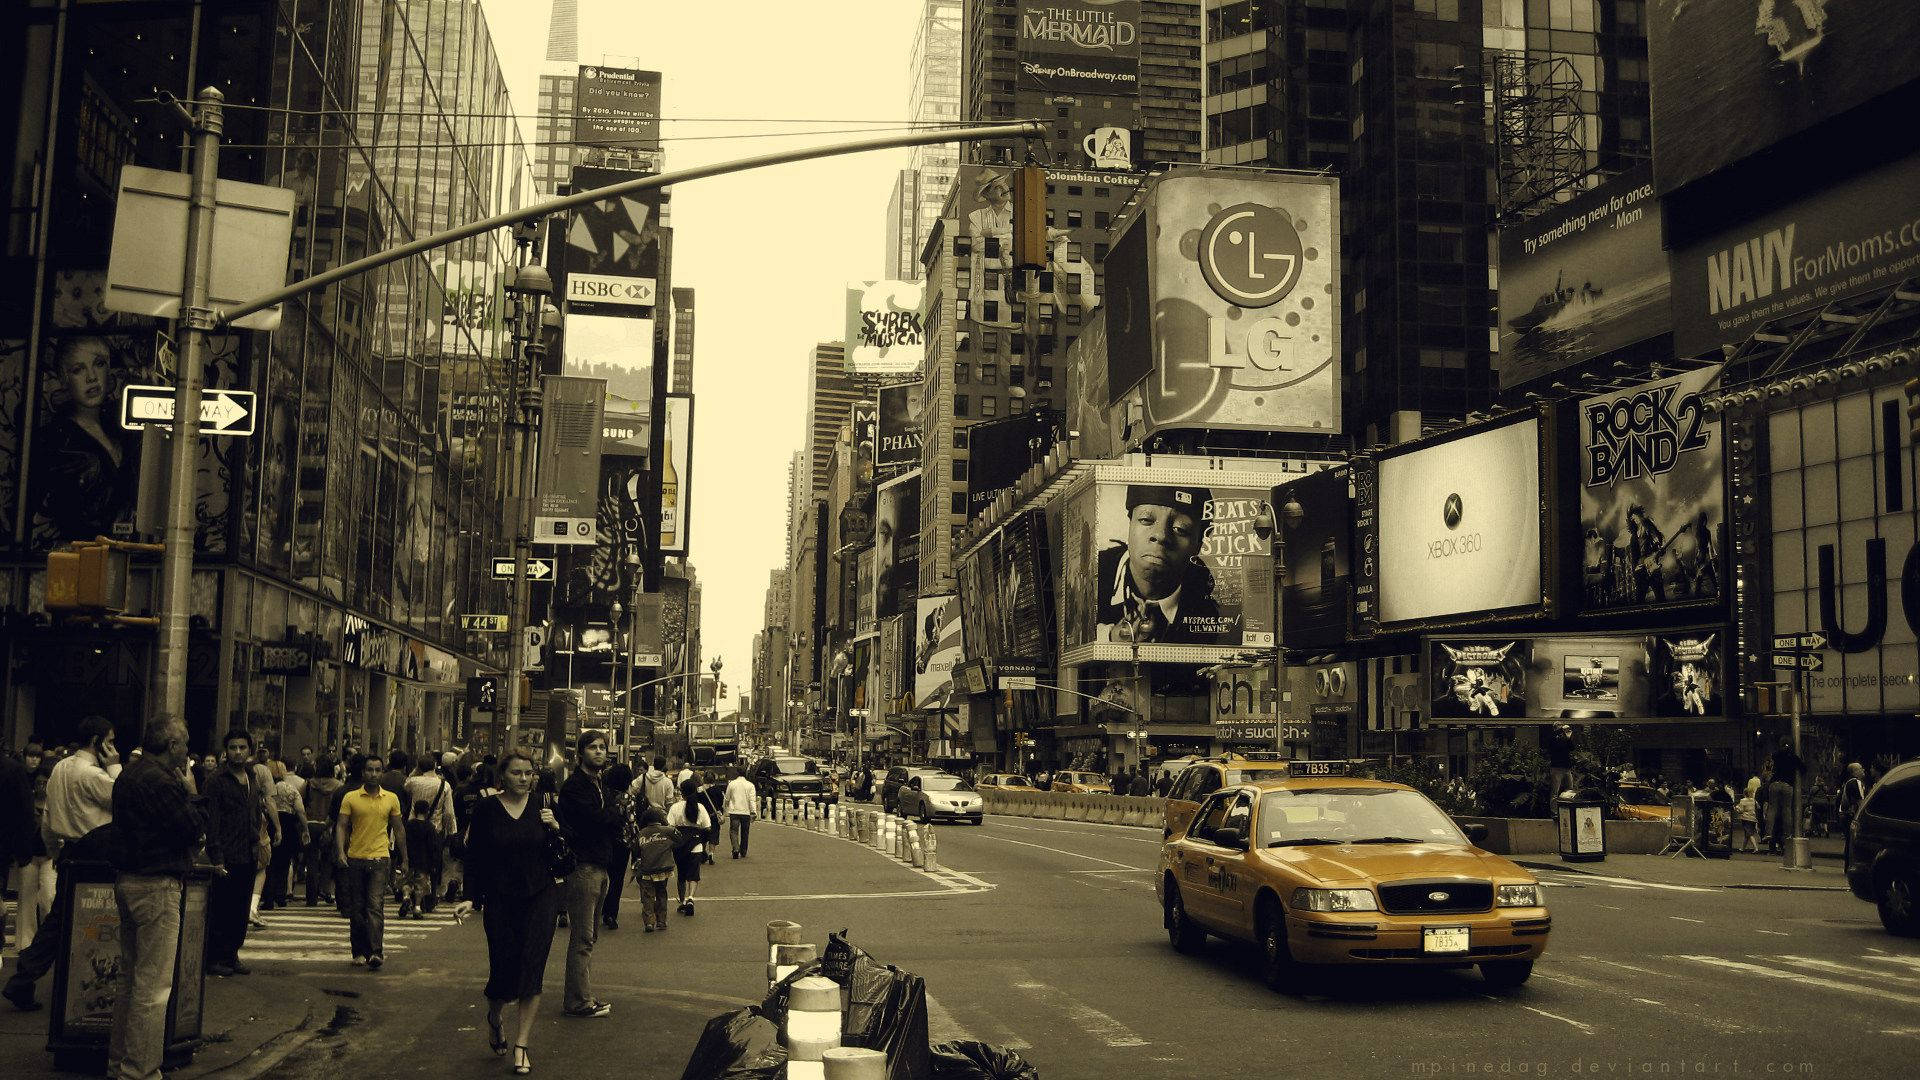 "Navigating the buzz of New York's city streets." Wallpaper